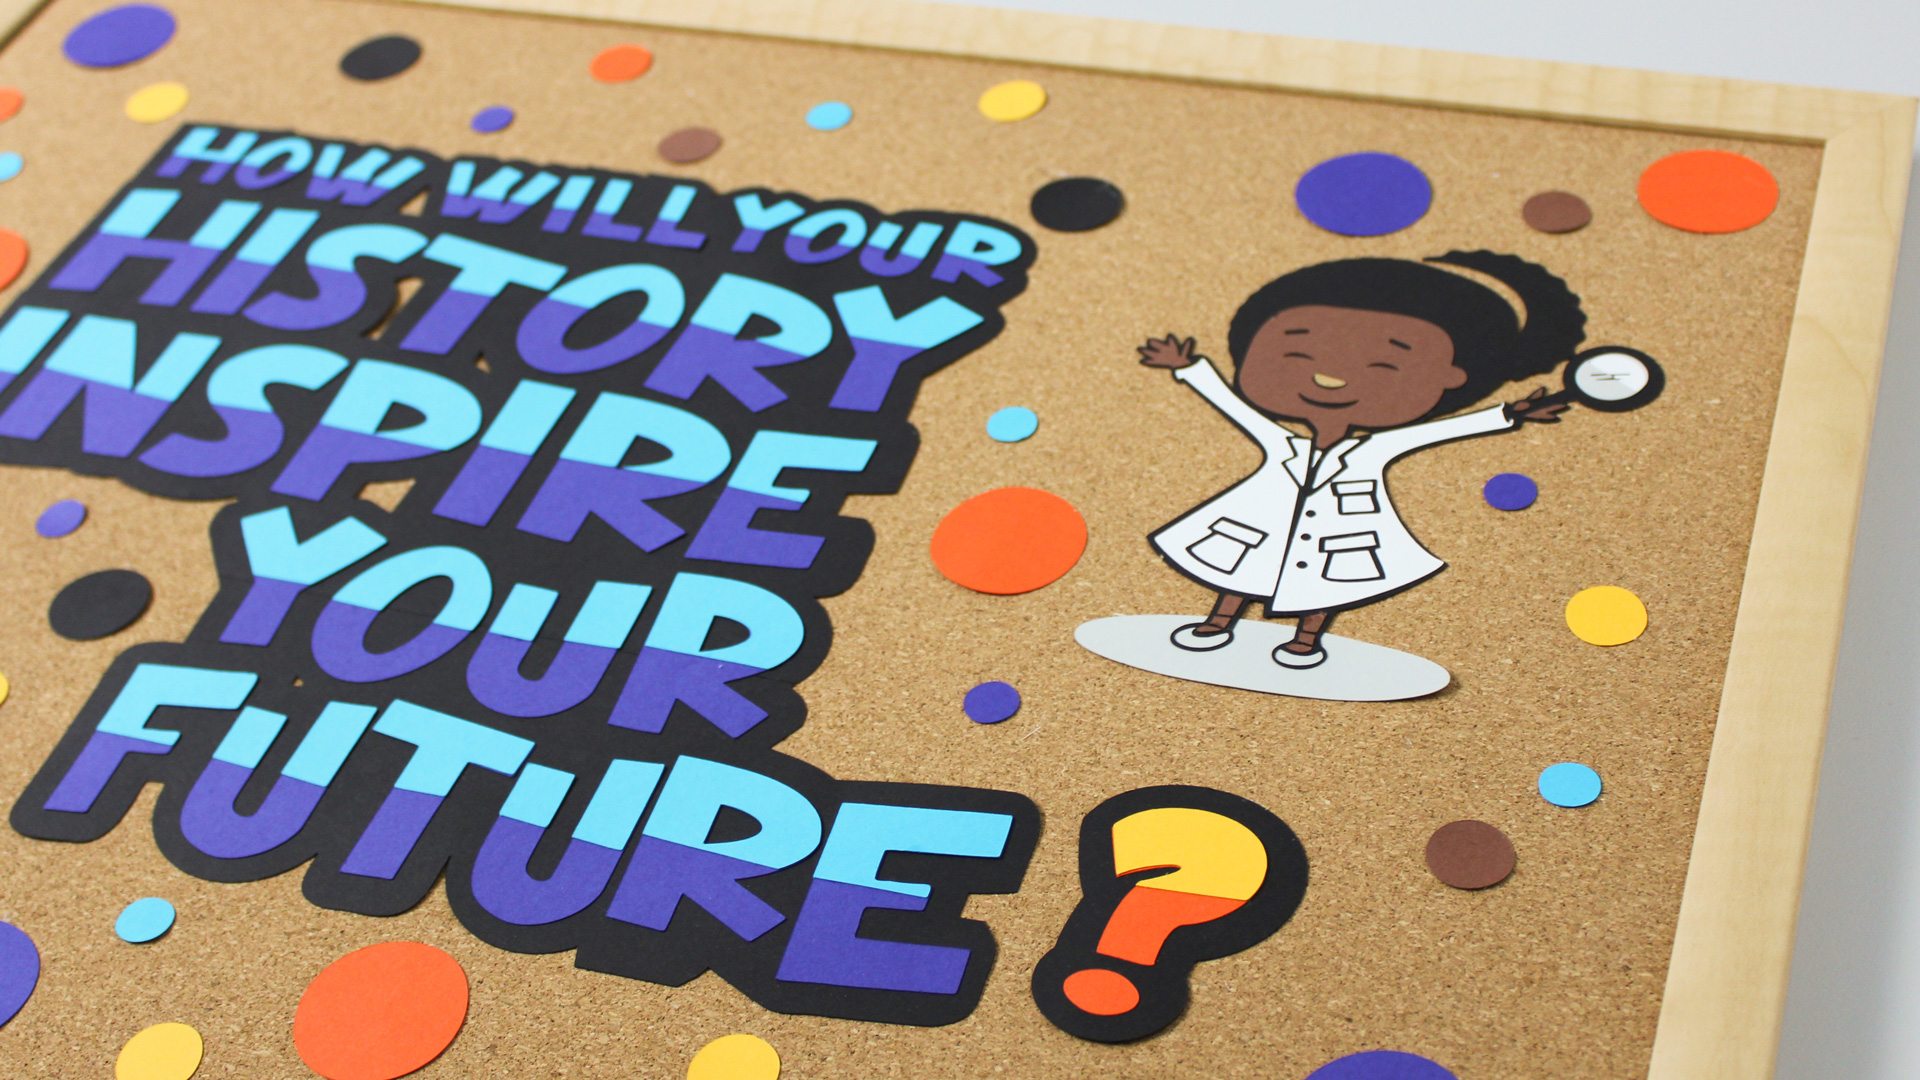 Cork board with paper cut out that says "How will your history inspire your future?"